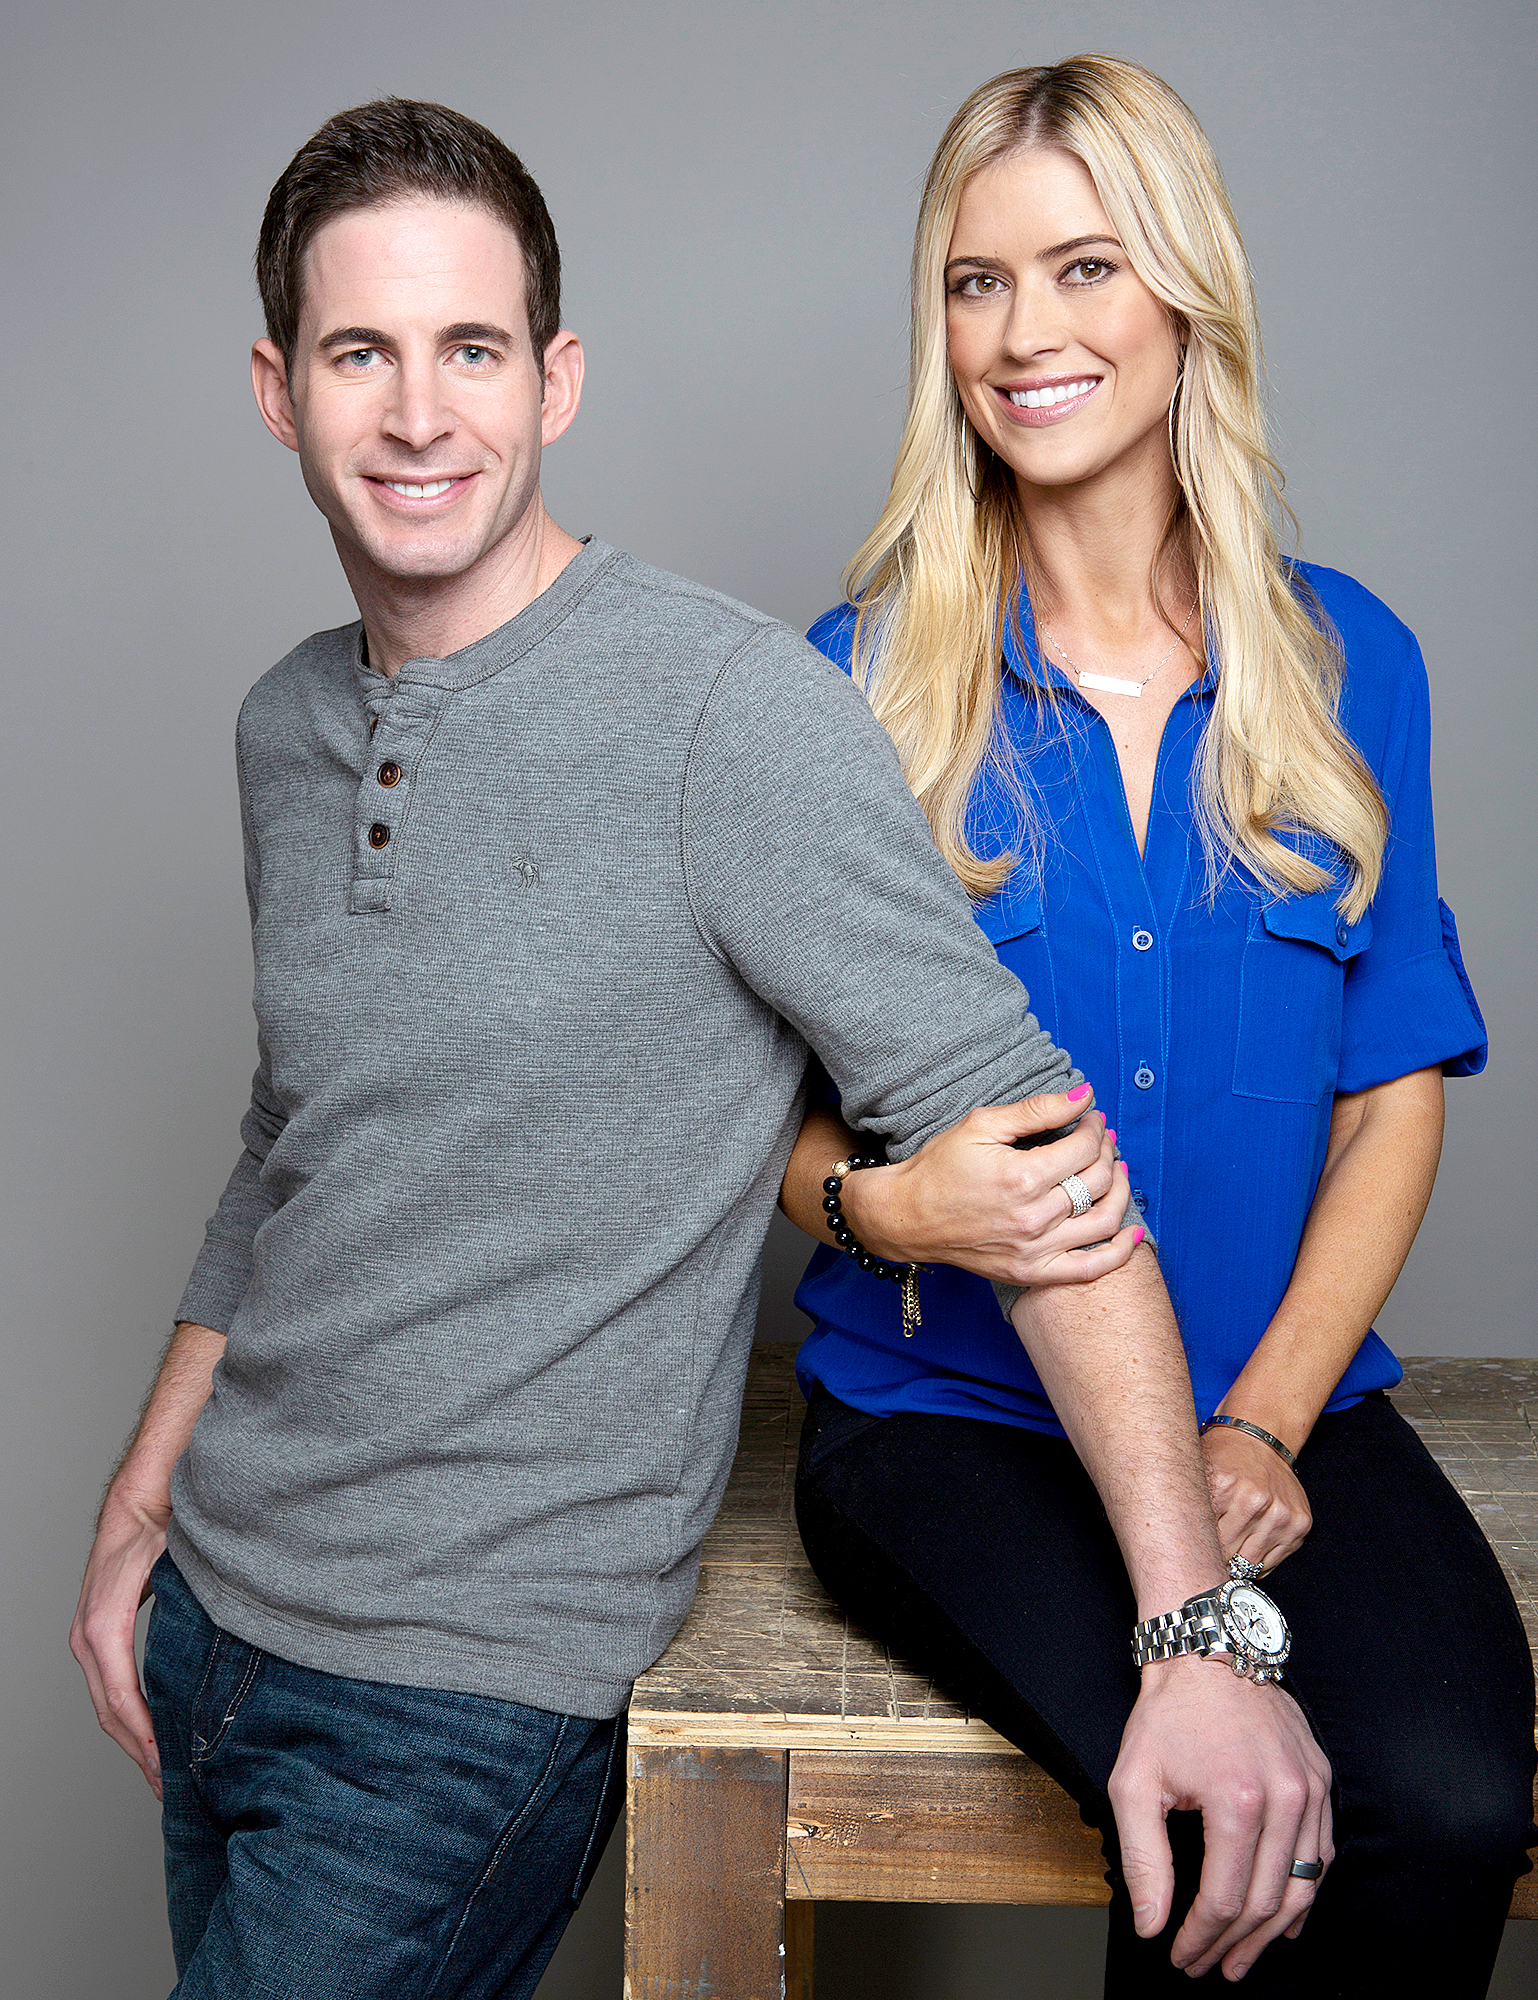 flip or flop dating others